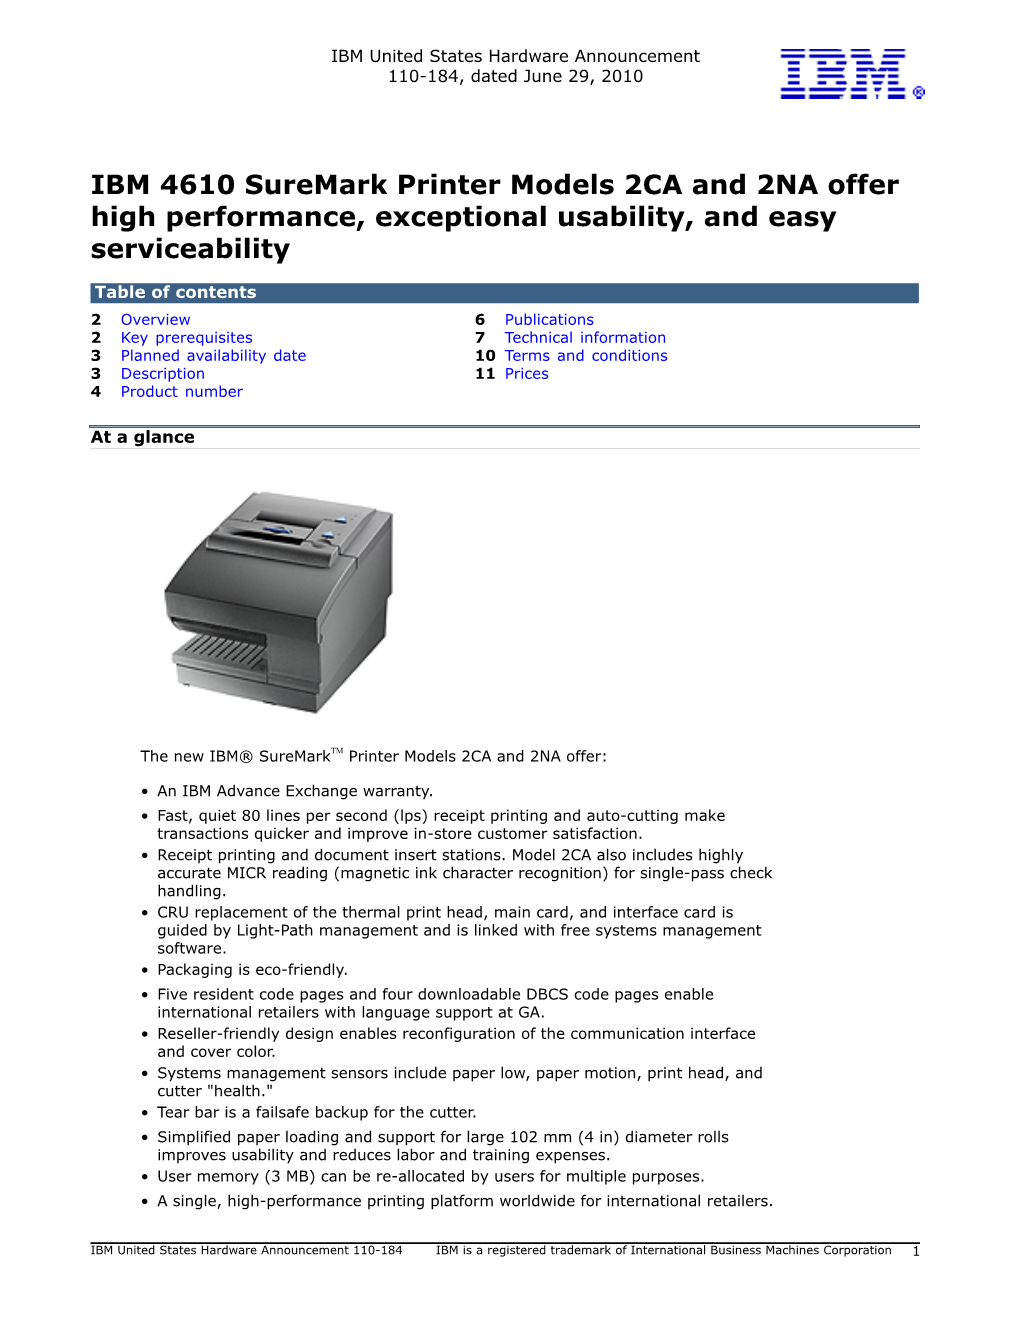 IBM 4610 Suremark Printer Models 2CA and 2NA Offer High Performance, Exceptional Usability, and Easy Serviceability